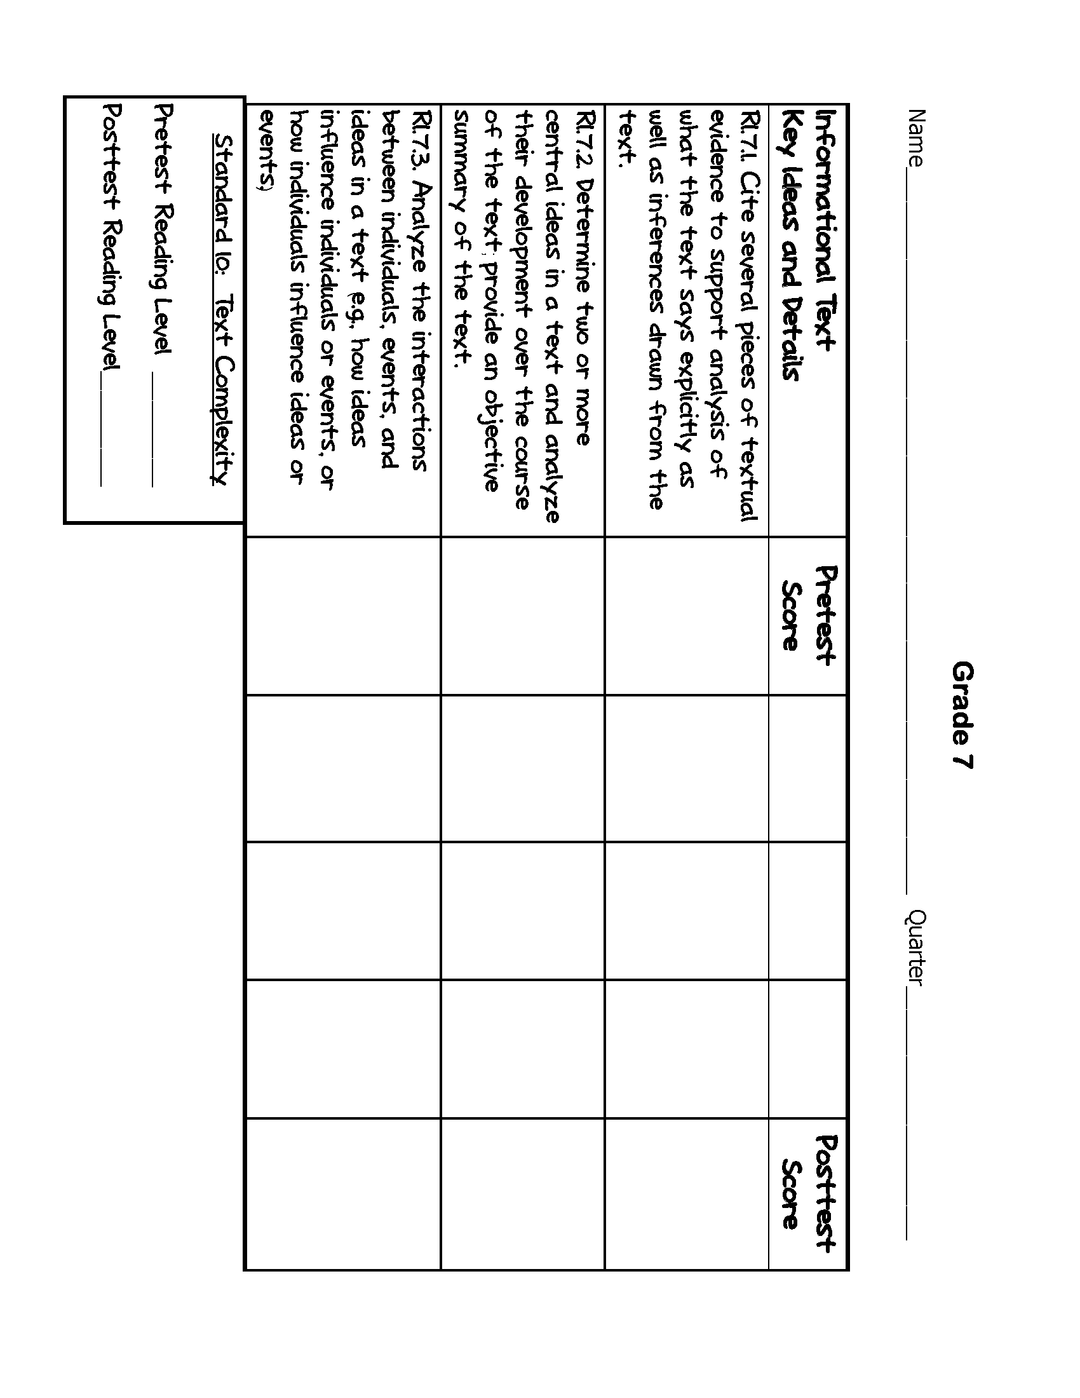 Common Core Charts, Organizers & Progress Forms For Every Standard: Grade 7